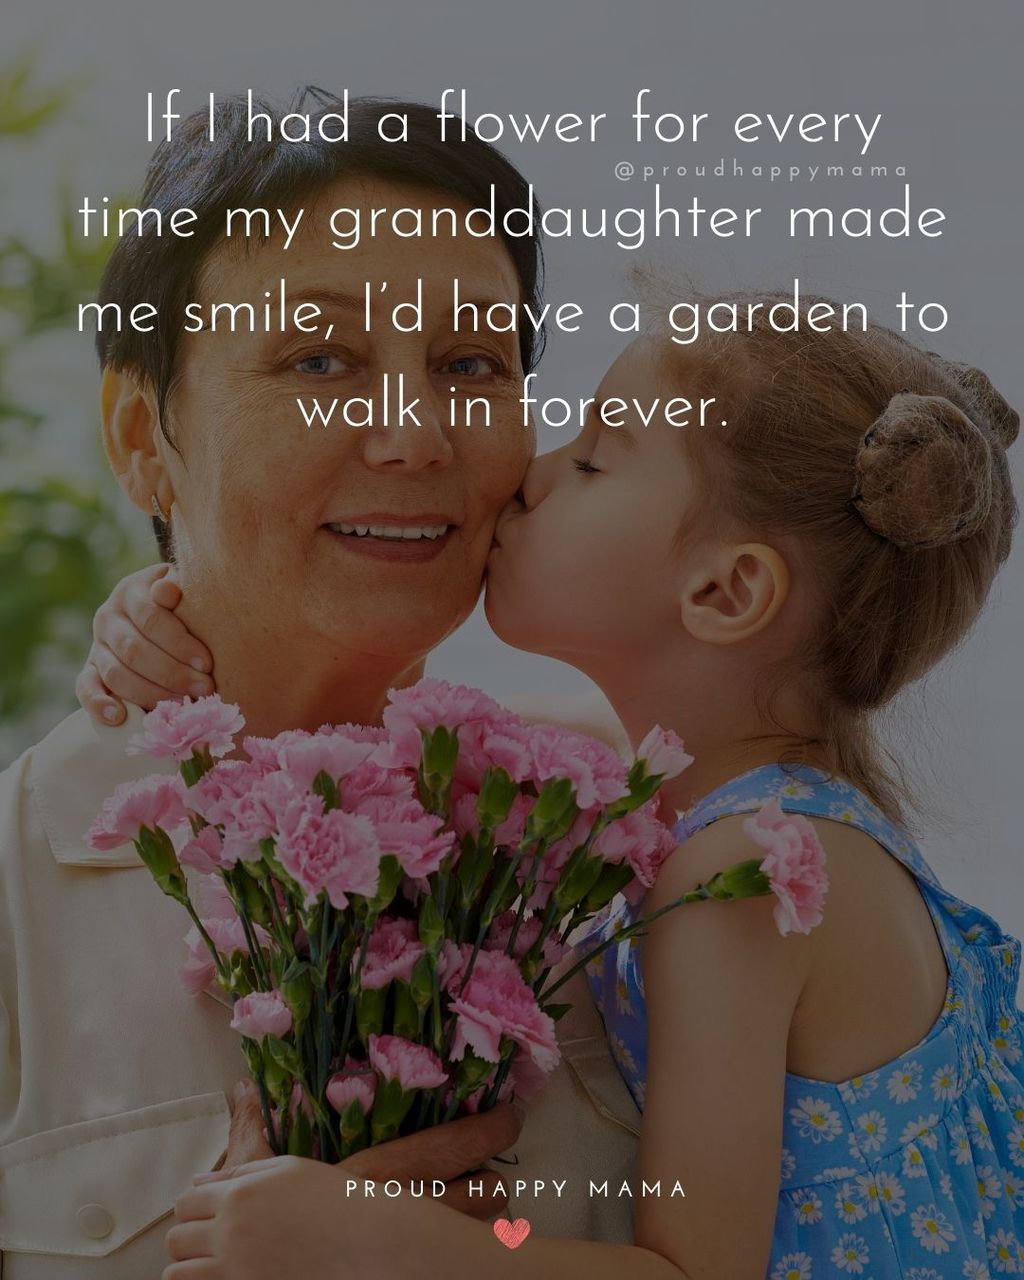 Young granddaughter giving grandma a kiss and flowers with granddaughter quote text overlay. ‘If I had a flower for every time my granddaughter made me smile, I’d have a garden to walk in forever.’